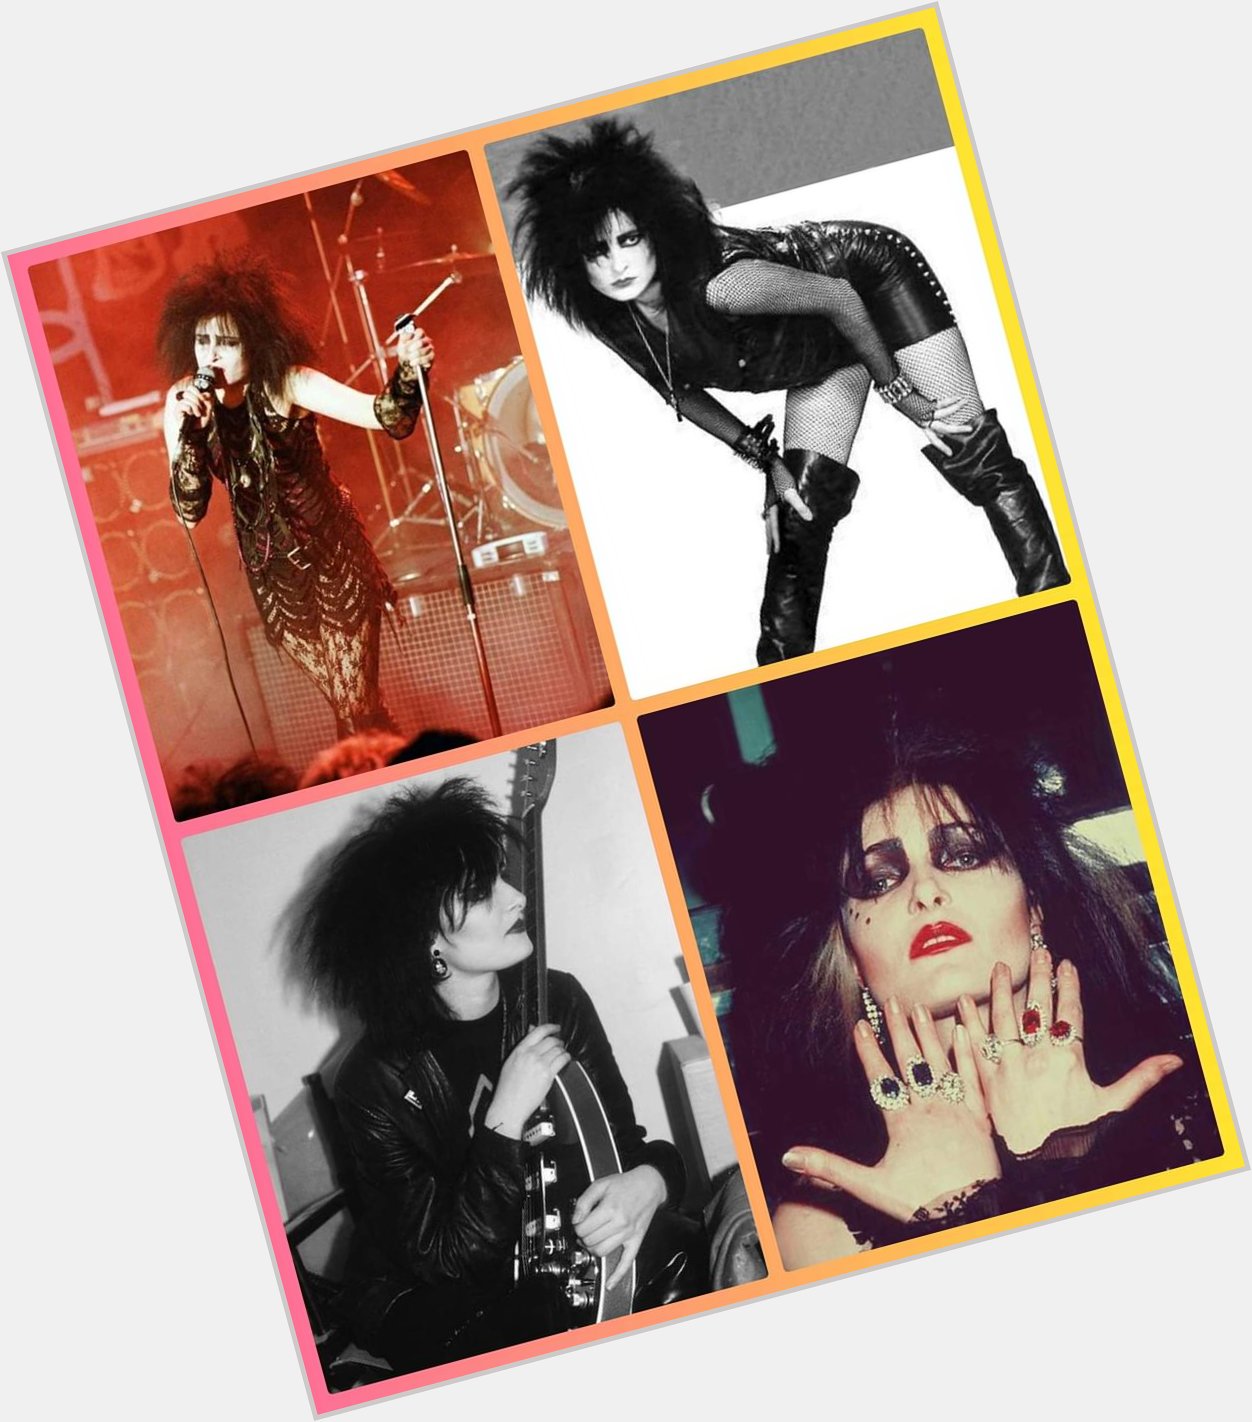 Happy 65th birthday to Siouxsie Sioux 